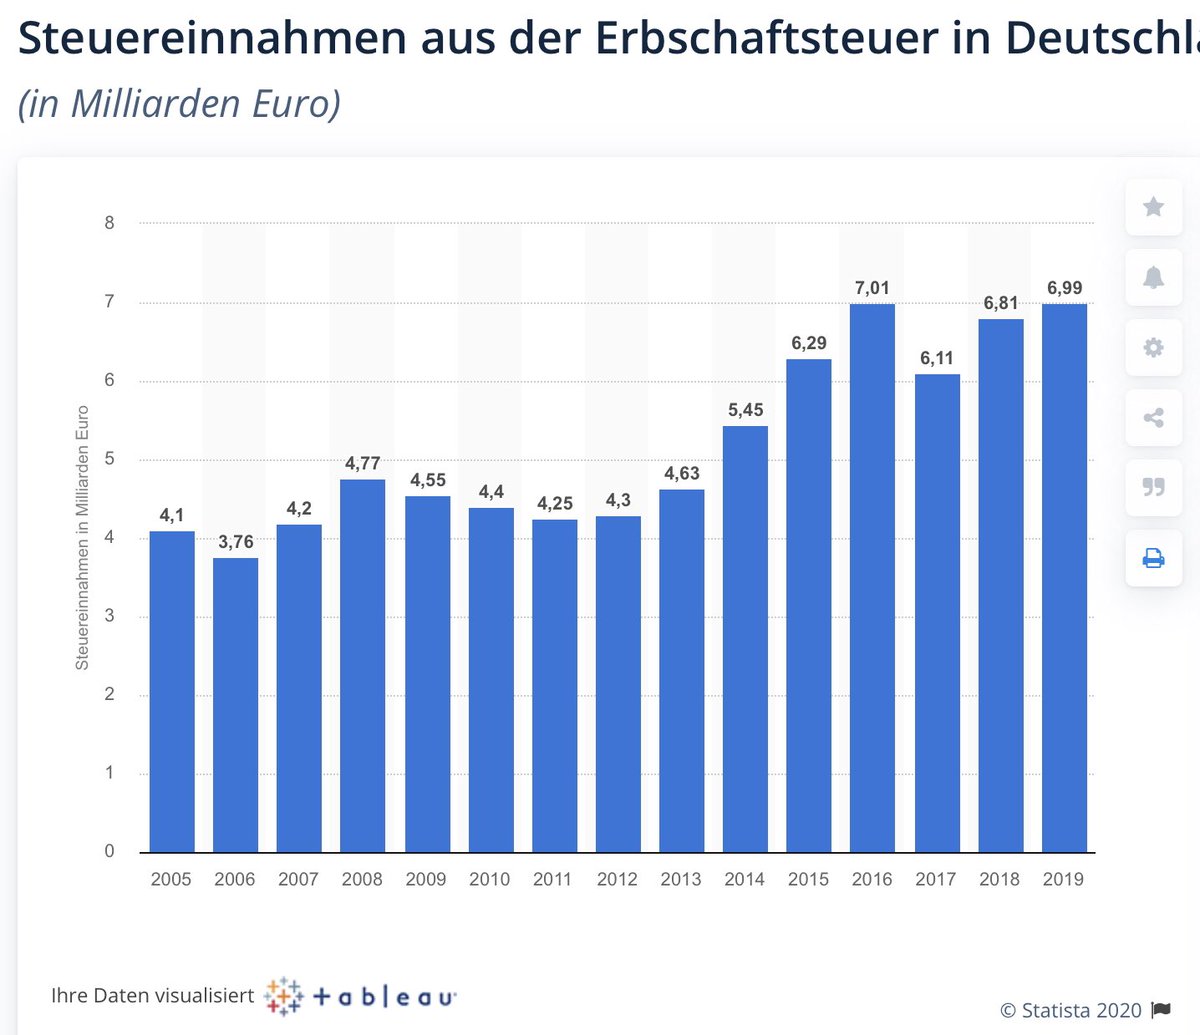 Facts on inheritances in Germany #4:€300 to 400 billion (~10% of GDP) are inherited in Germany every year.Inheritance tax revenues were €7 billion in 2019 — the low effective tax rate is mainly due to exemptions of the inheritance of companies. https://www.diw.de/documents/publikationen/73/diw_01.c.560982.de/17-27-3.pdf